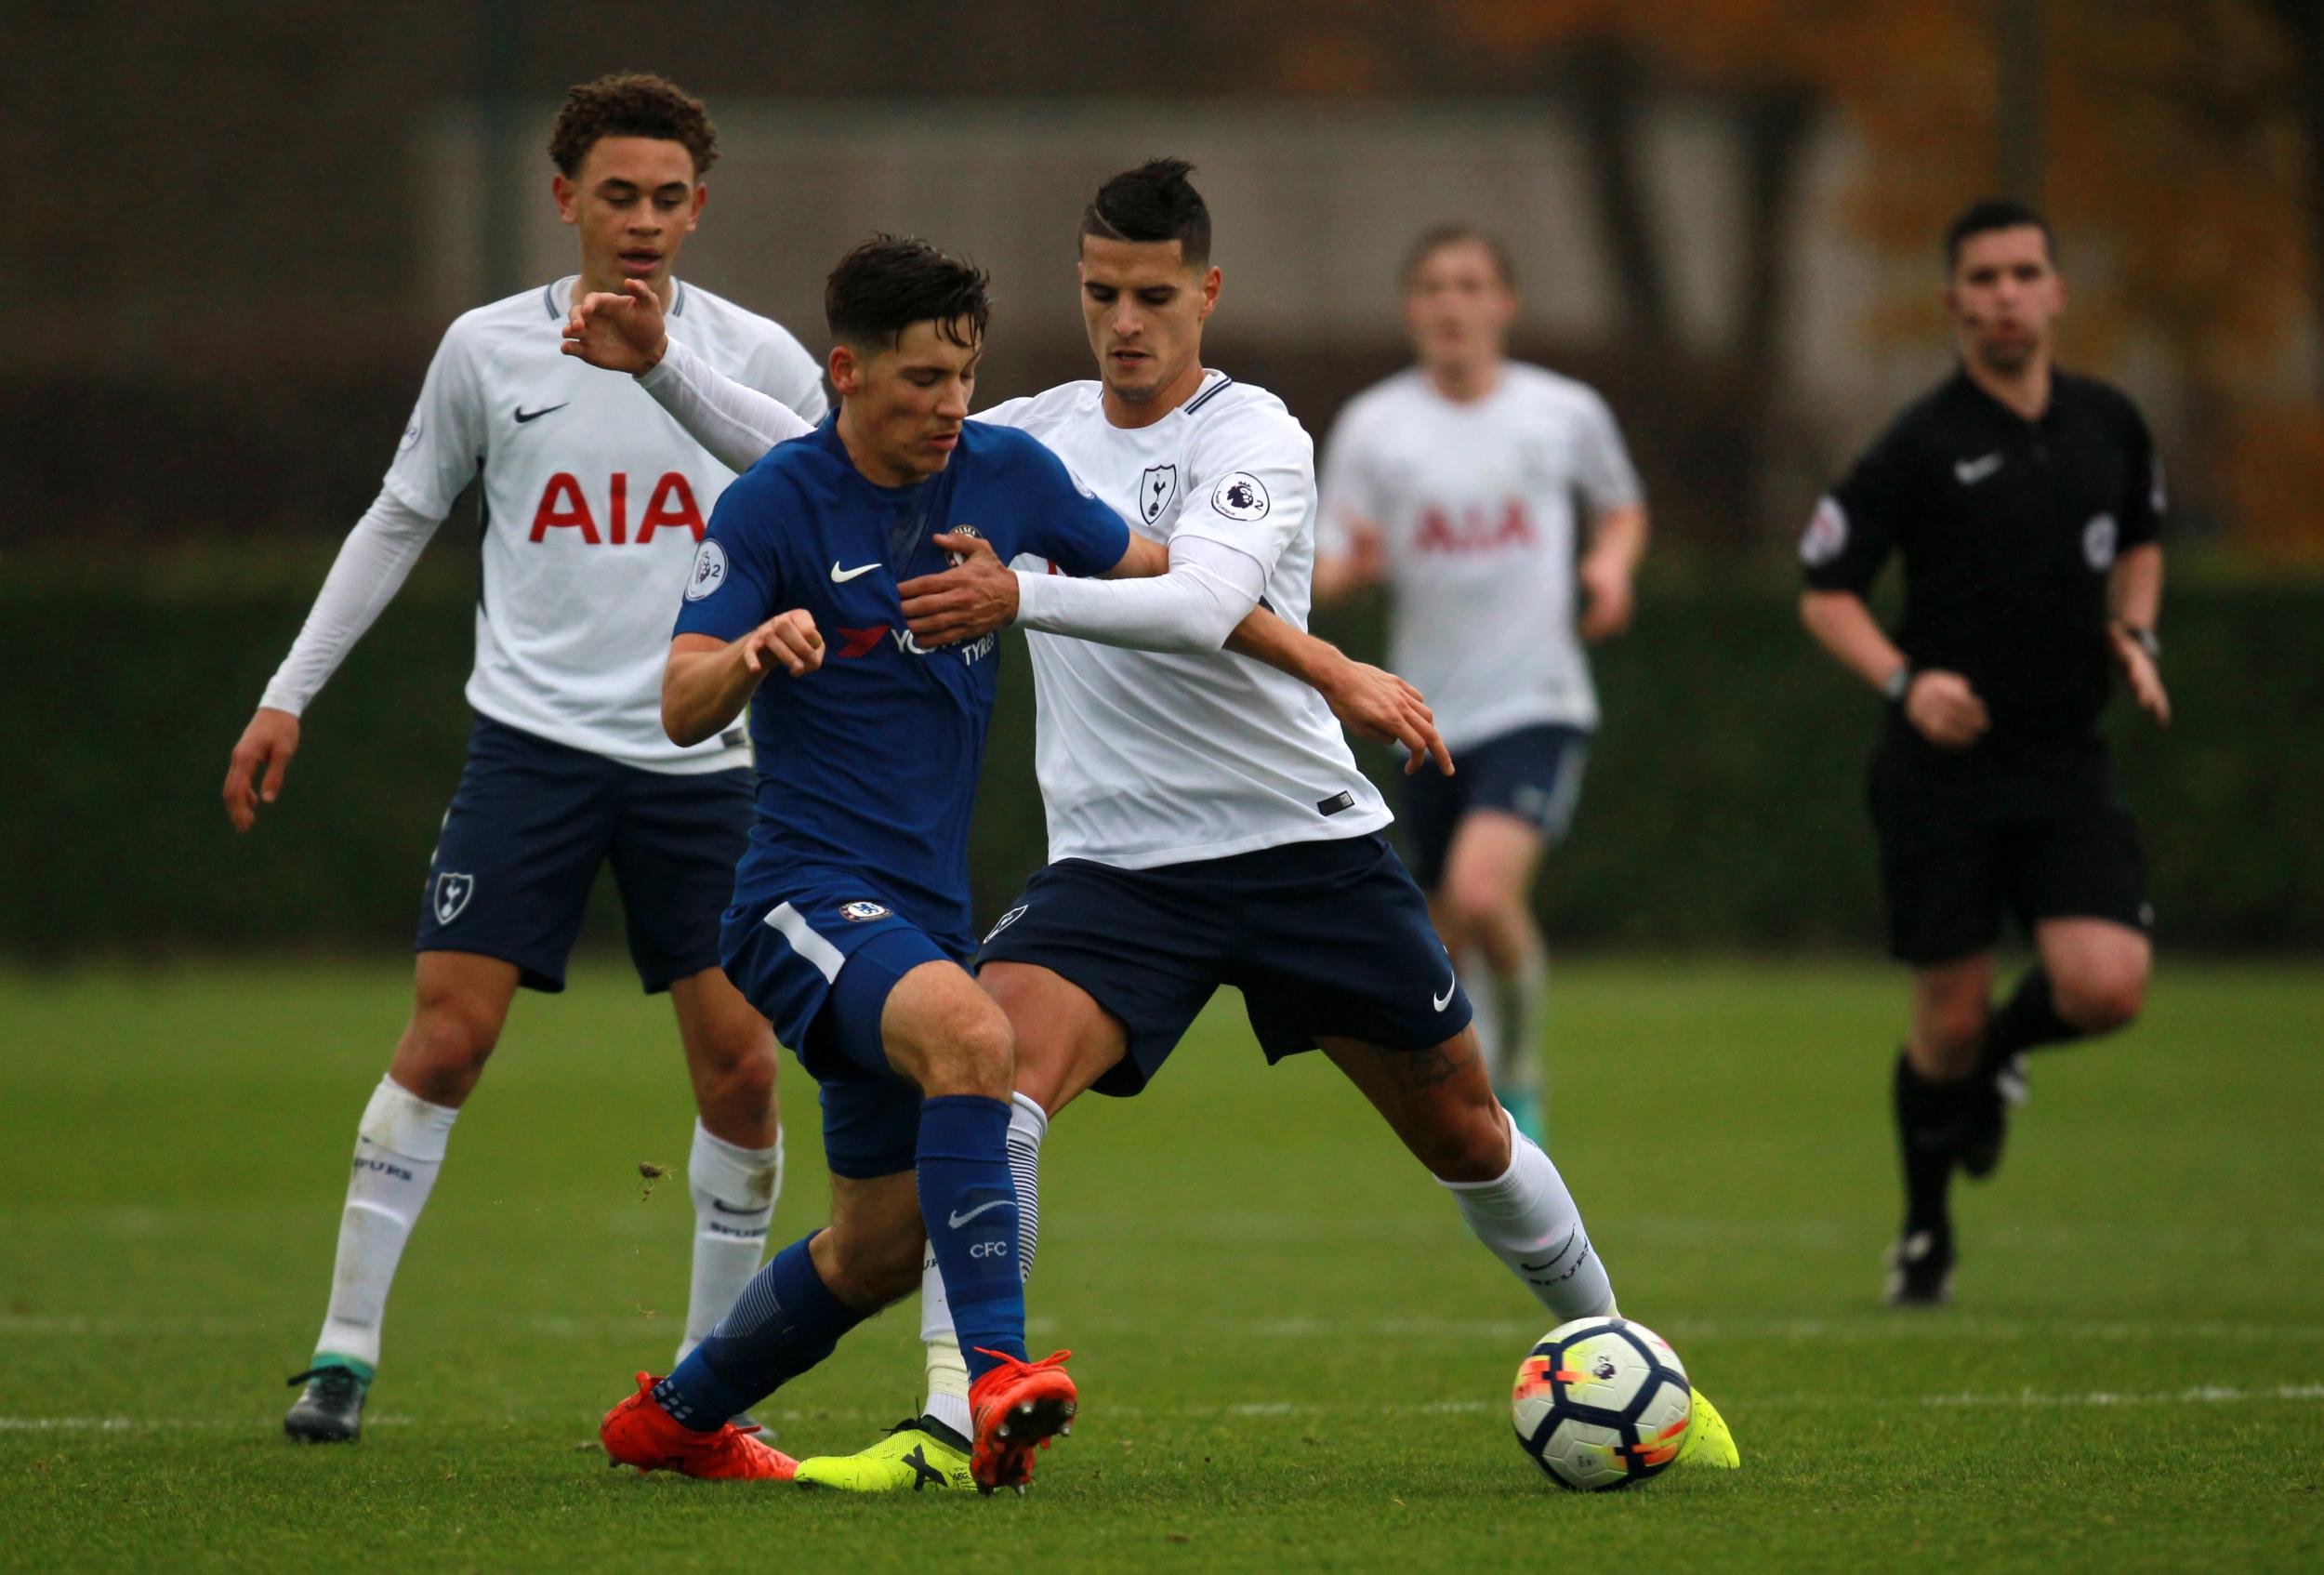 Erik Lamela can provide qualities in the final third which Tottenham have been missing, says Mauricio Pochettino